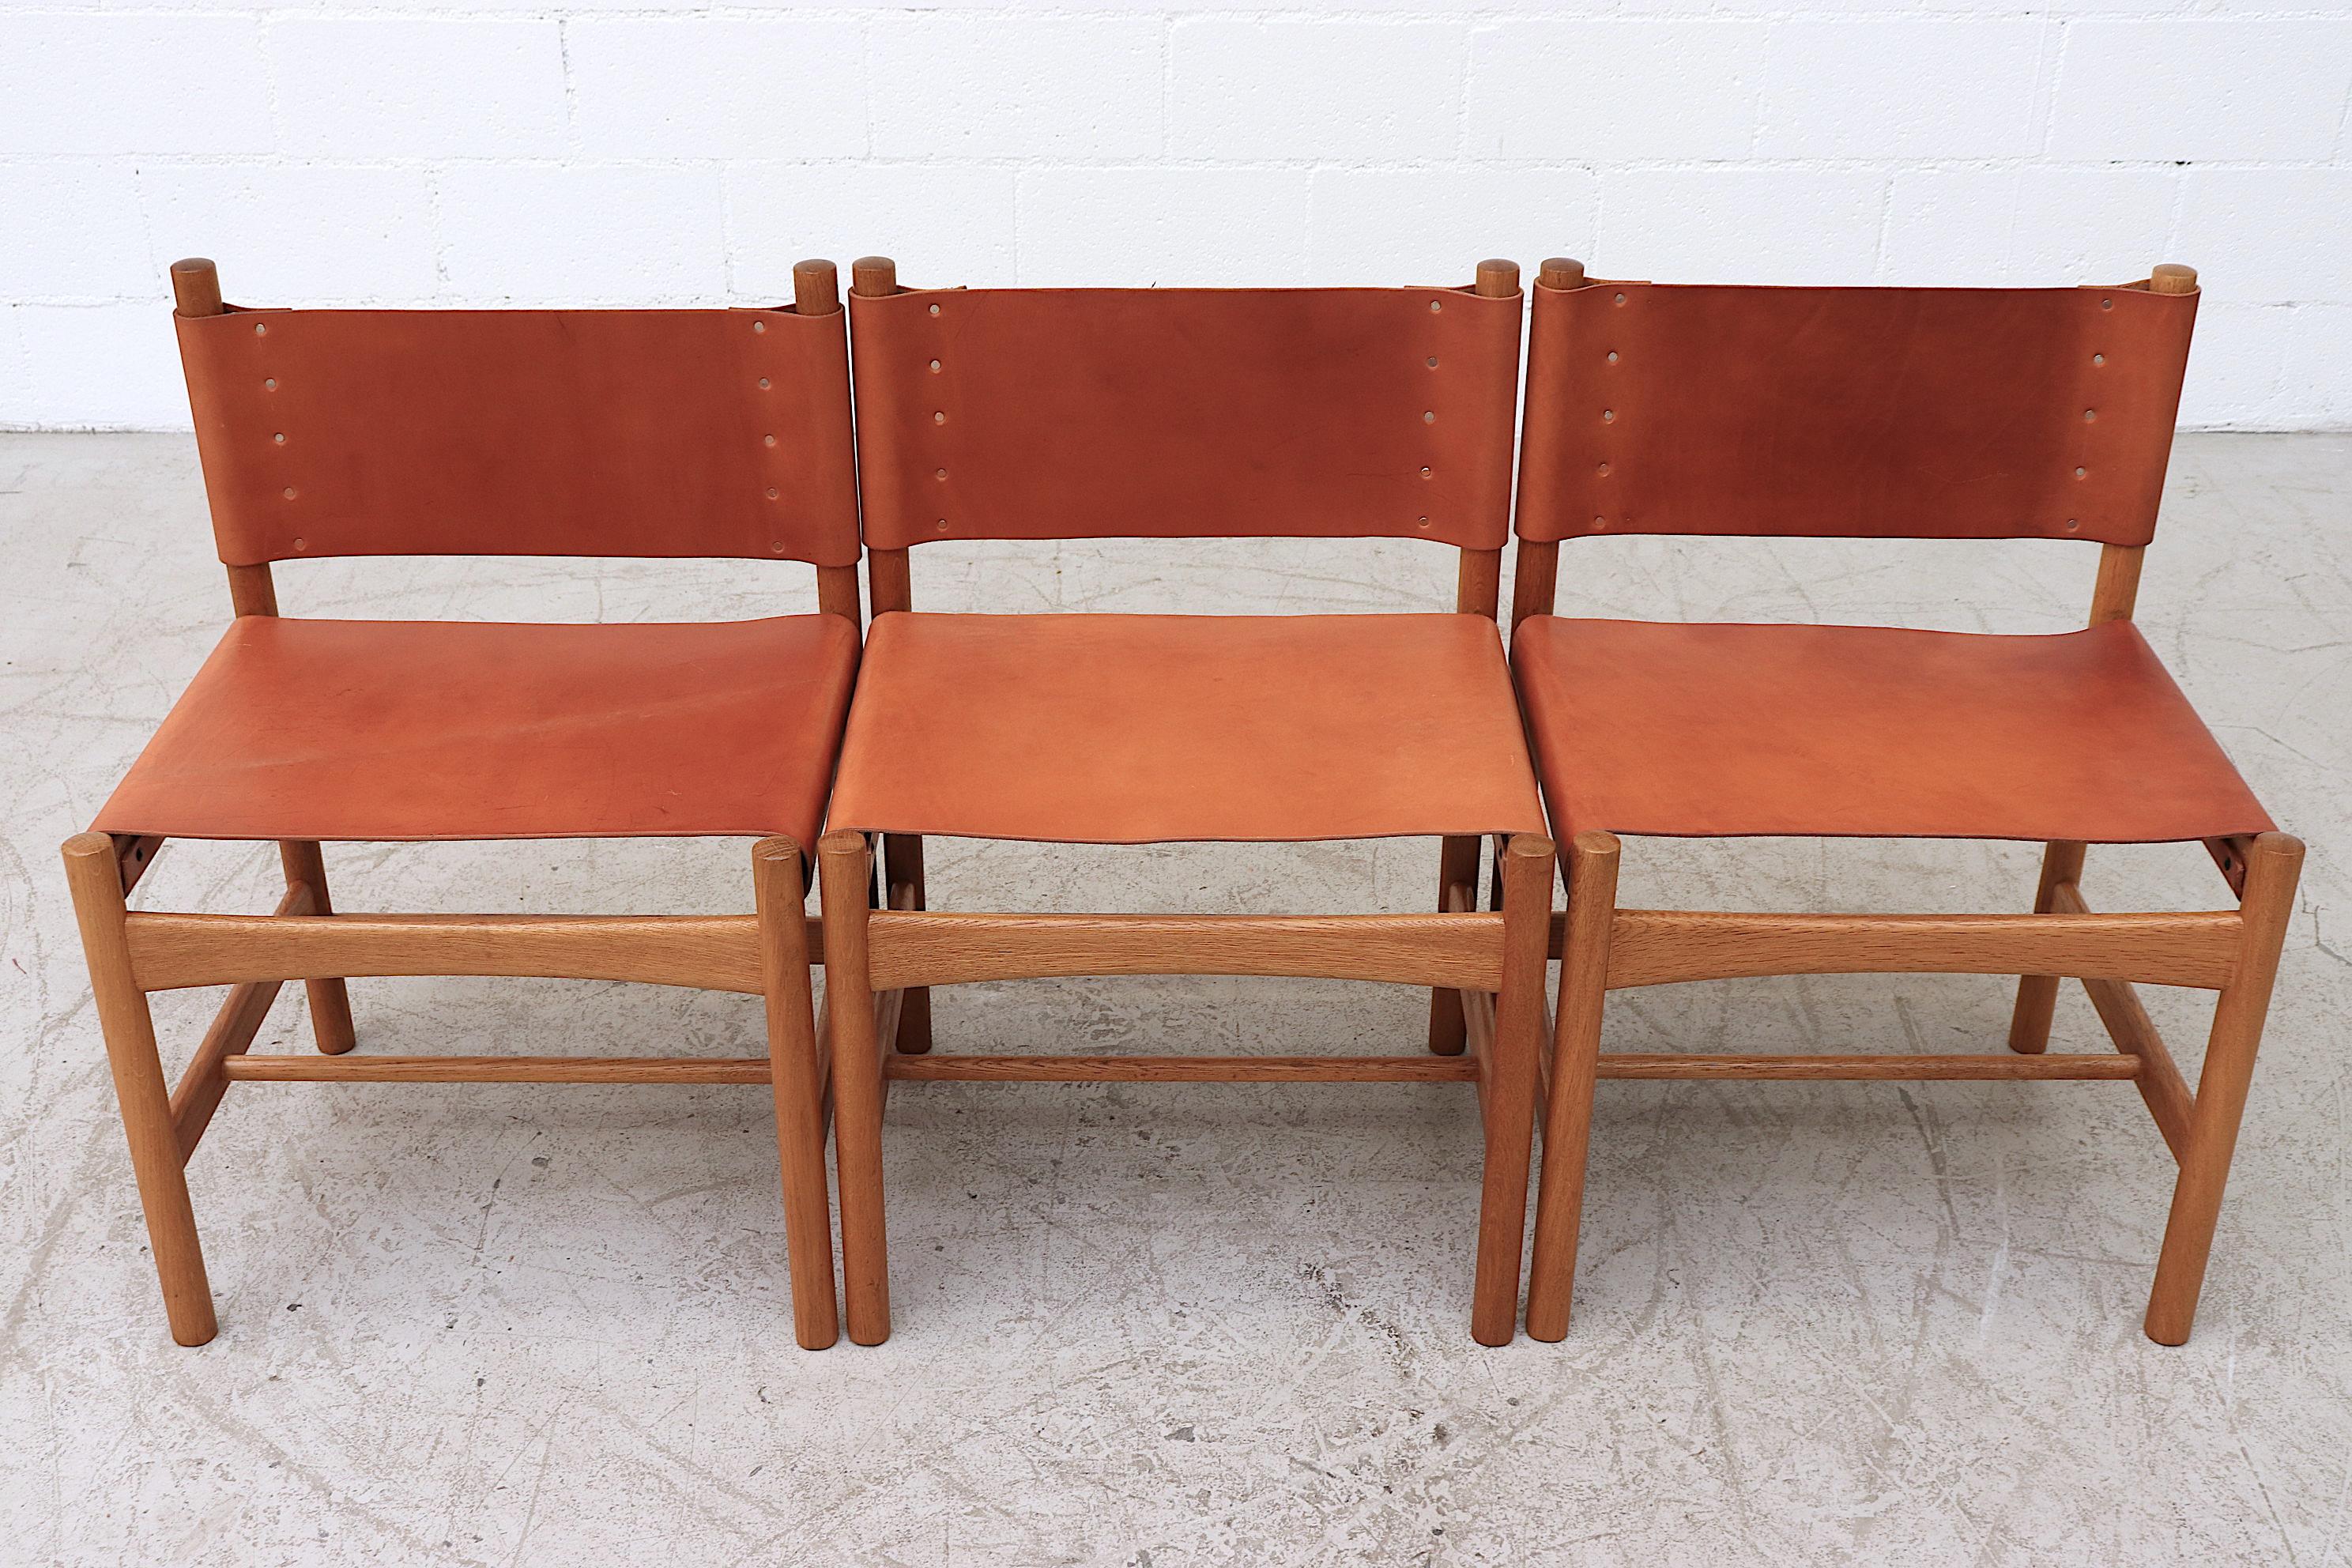 Set of 6 Børge Mogensen oak and custom leather dining chairs with lightly refinished frames and new custom oiled leather seats and backs, not to original specs. Frames in good original condition with moderate wear consistent with age and use.